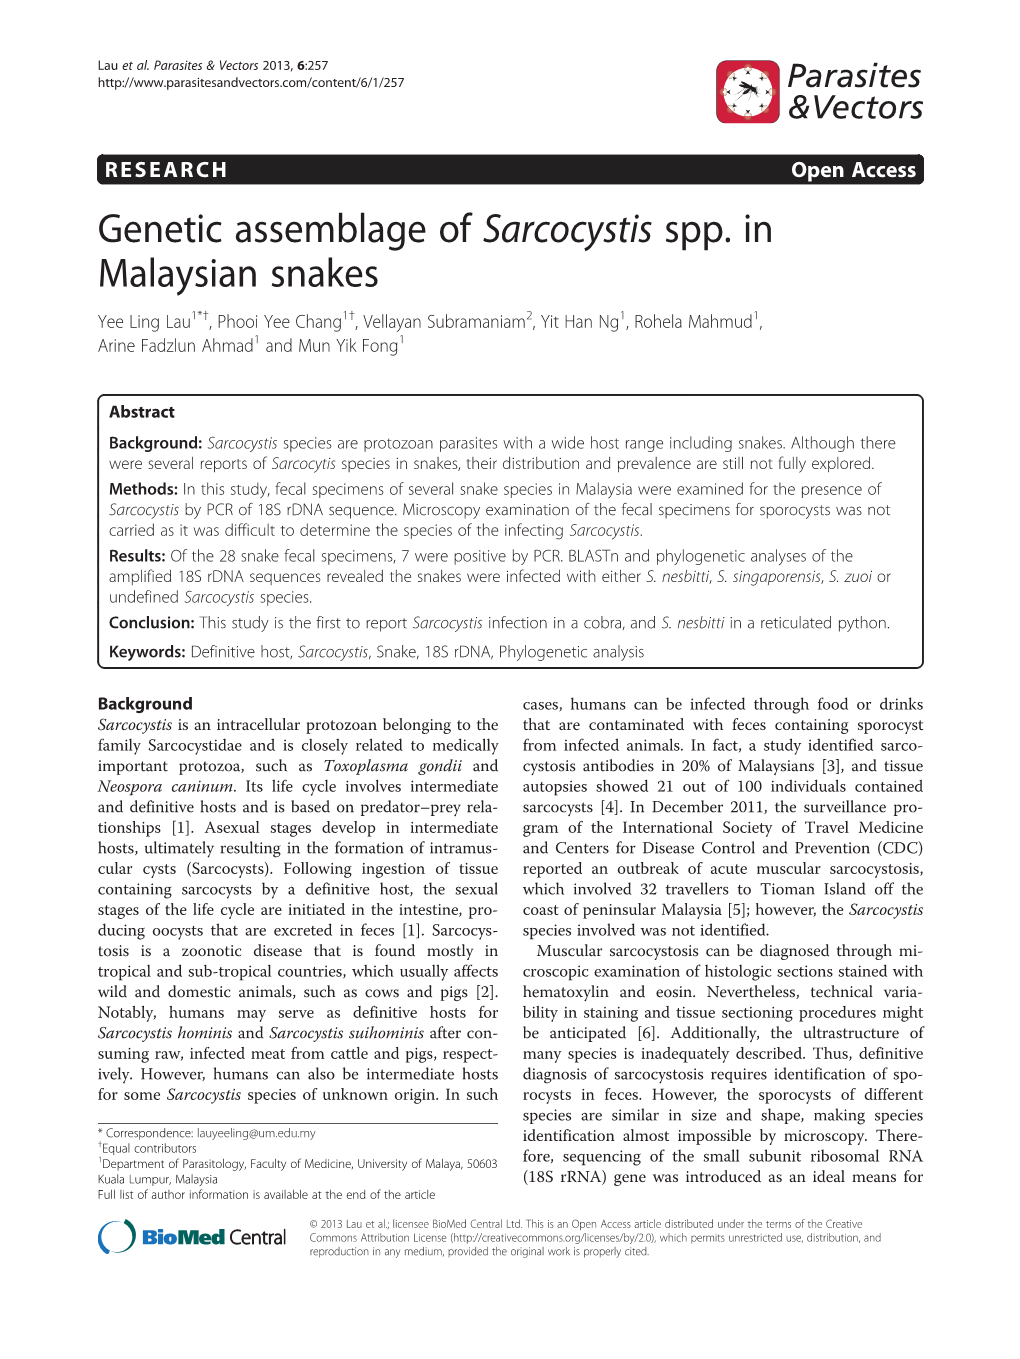 Genetic Assemblage of Sarcocystis Spp. in Malaysian Snakes